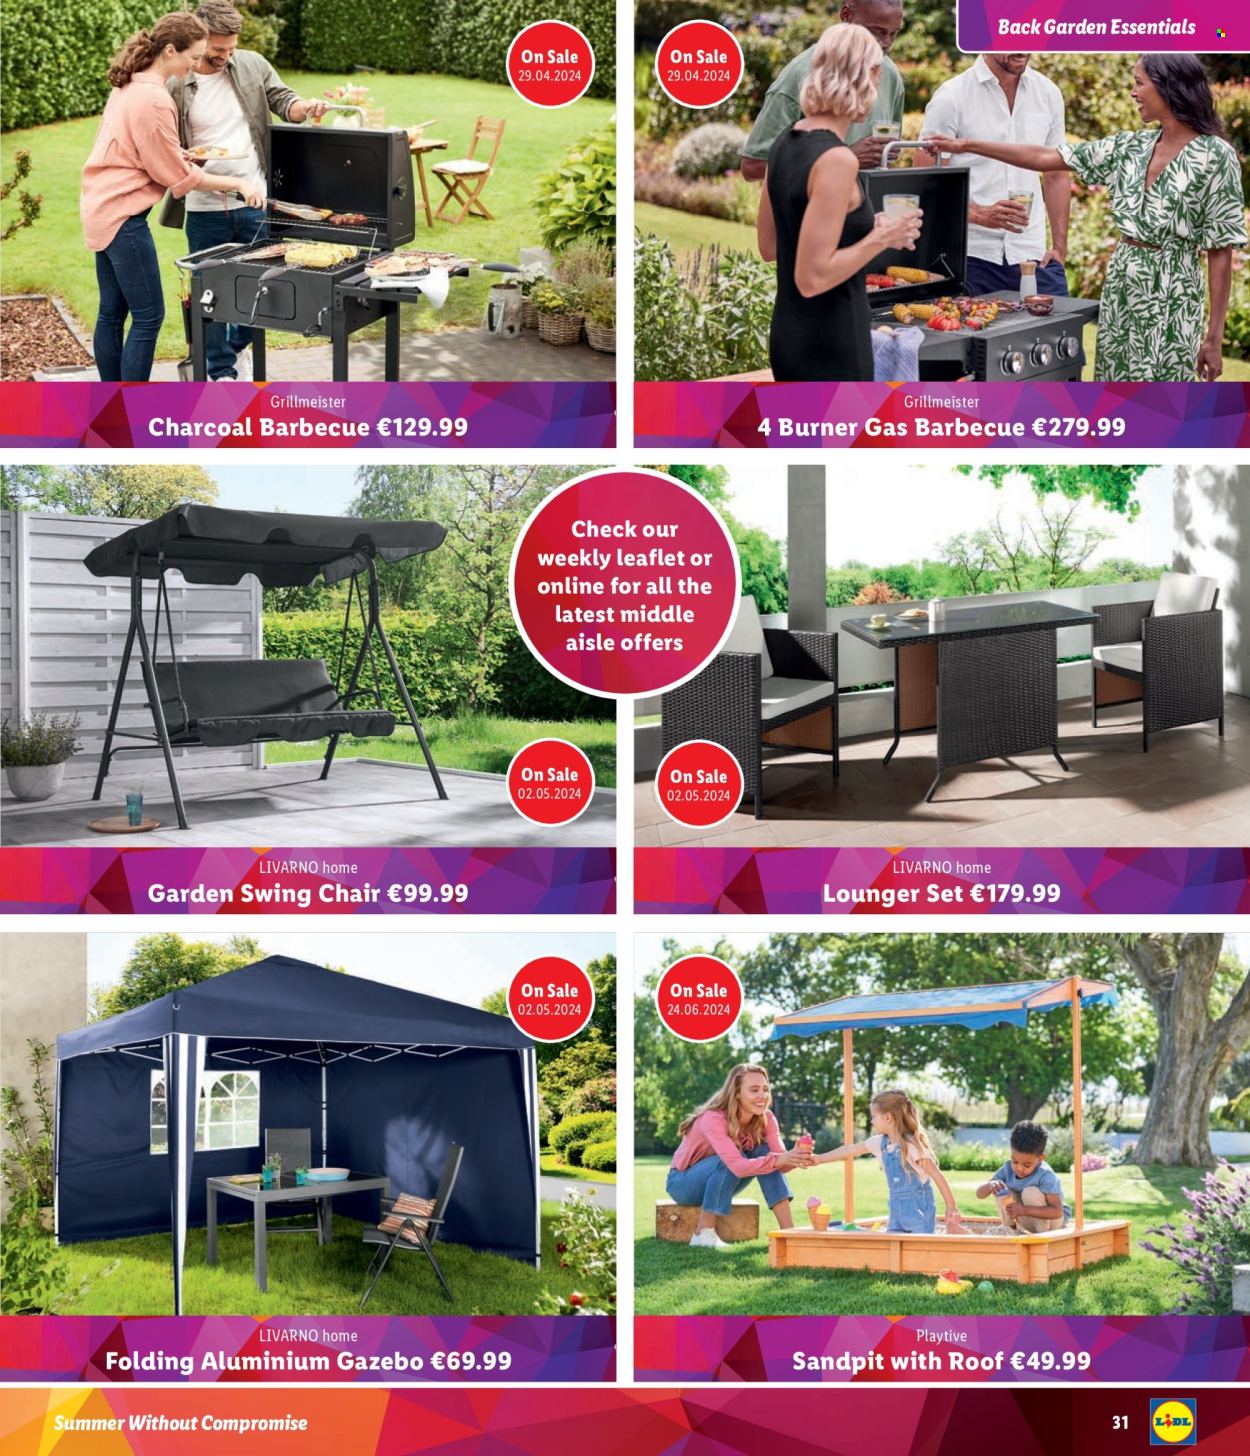 thumbnail - Lidl offer  - Sales products - chair, lounger, patio swing, sandpit, gazebo, grill, burner gas barbecue, charcoal grill. Page 31.